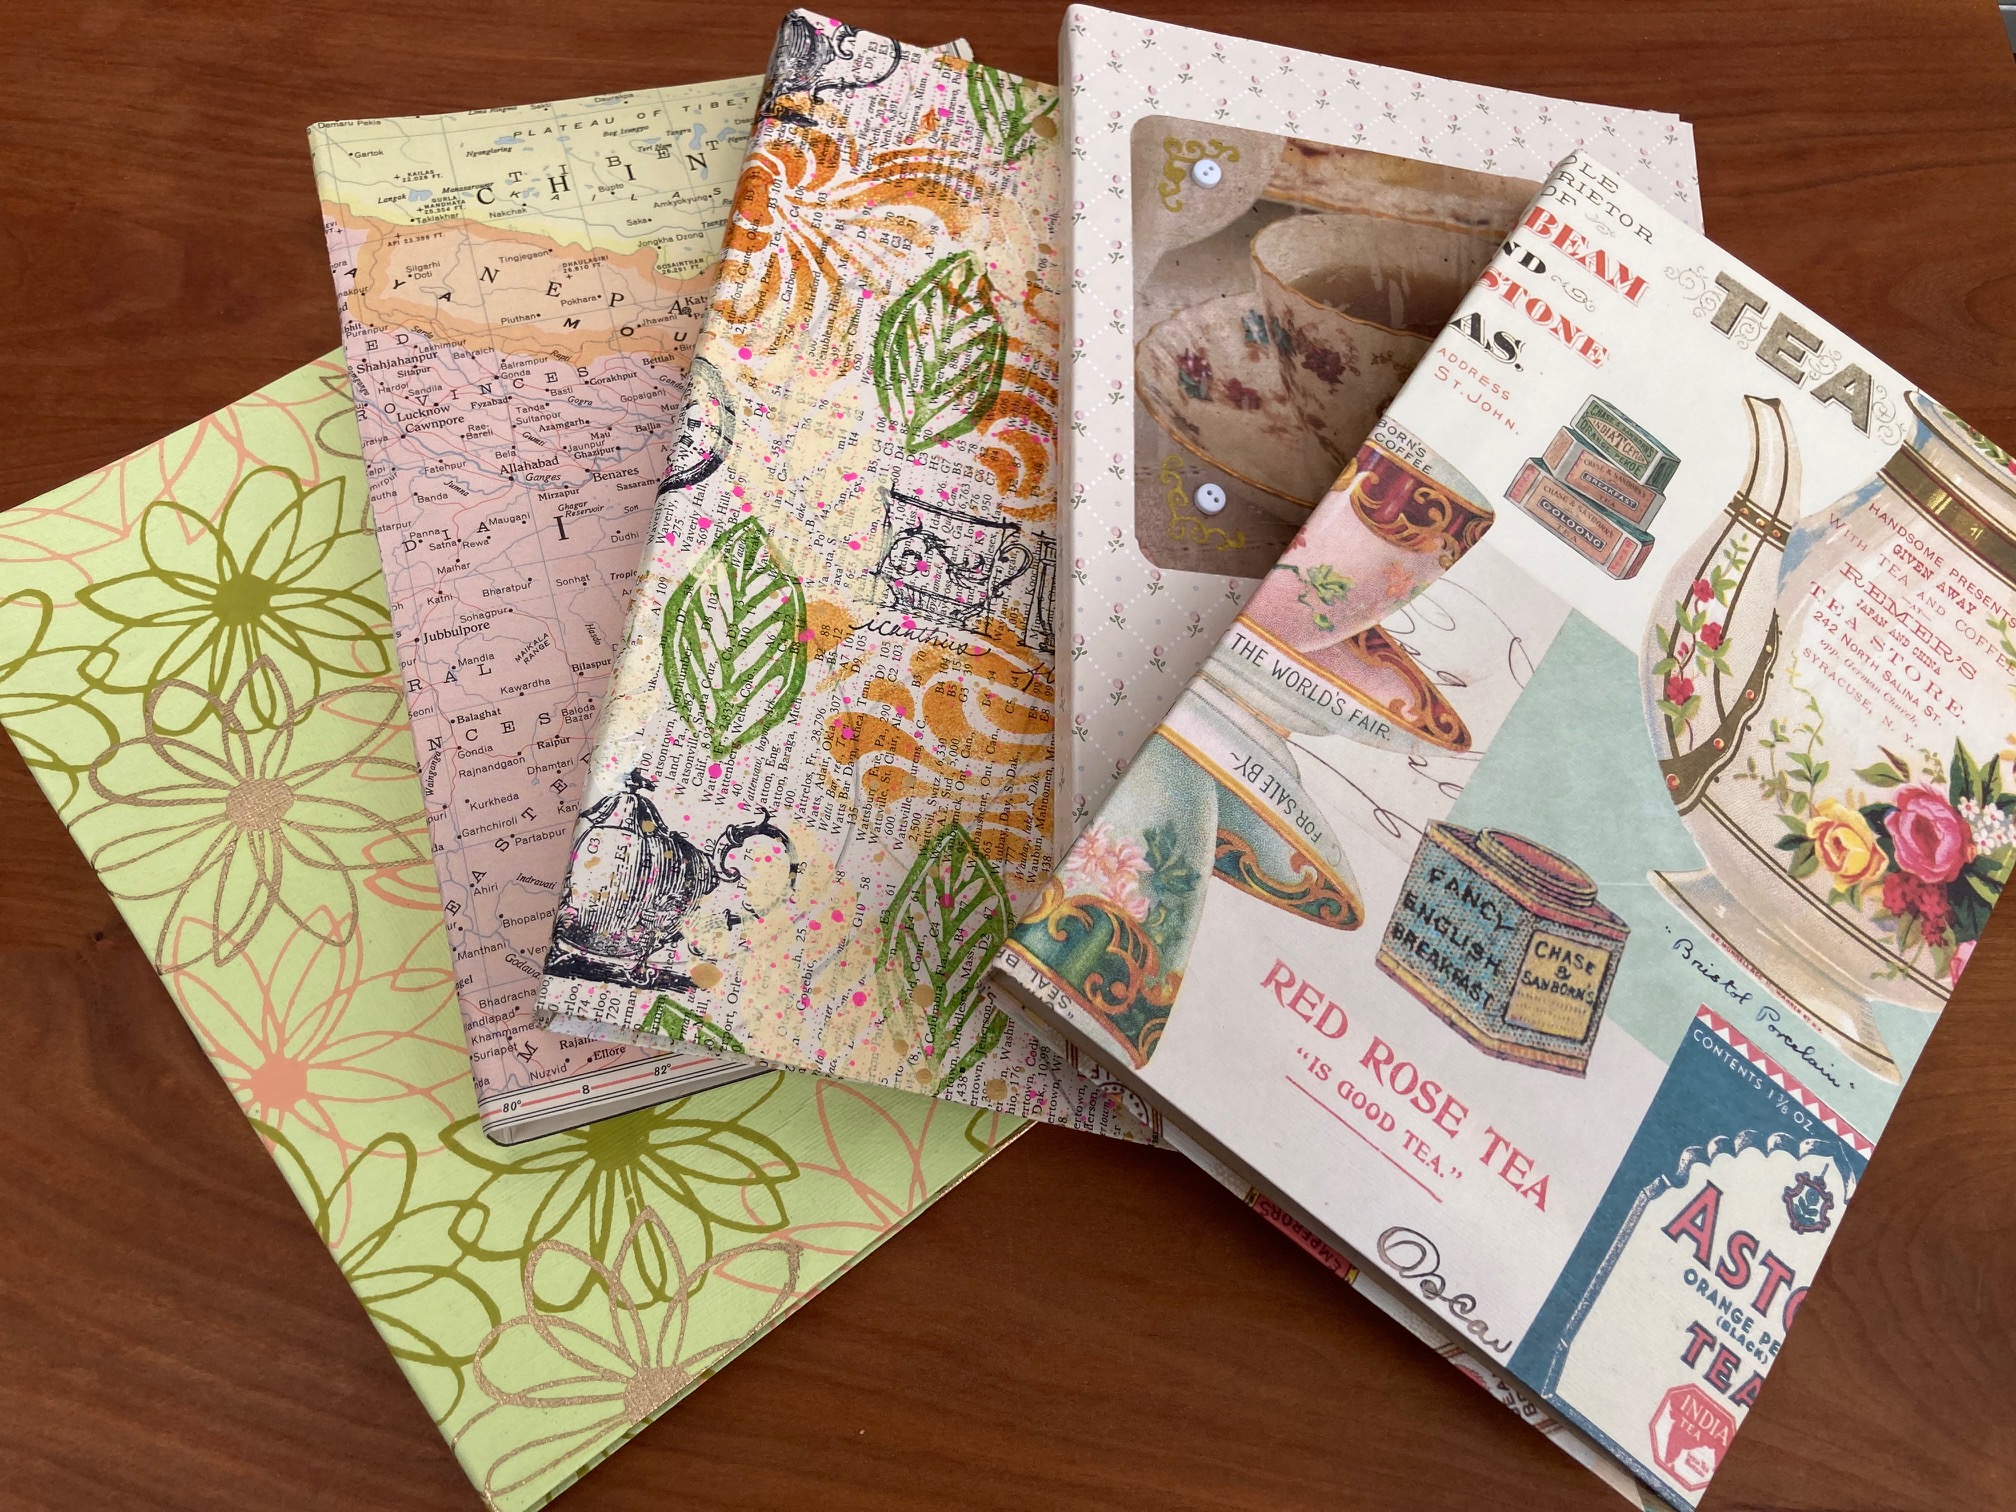 What Is a Junk Journal? - Learn How to Make a Junk Journal